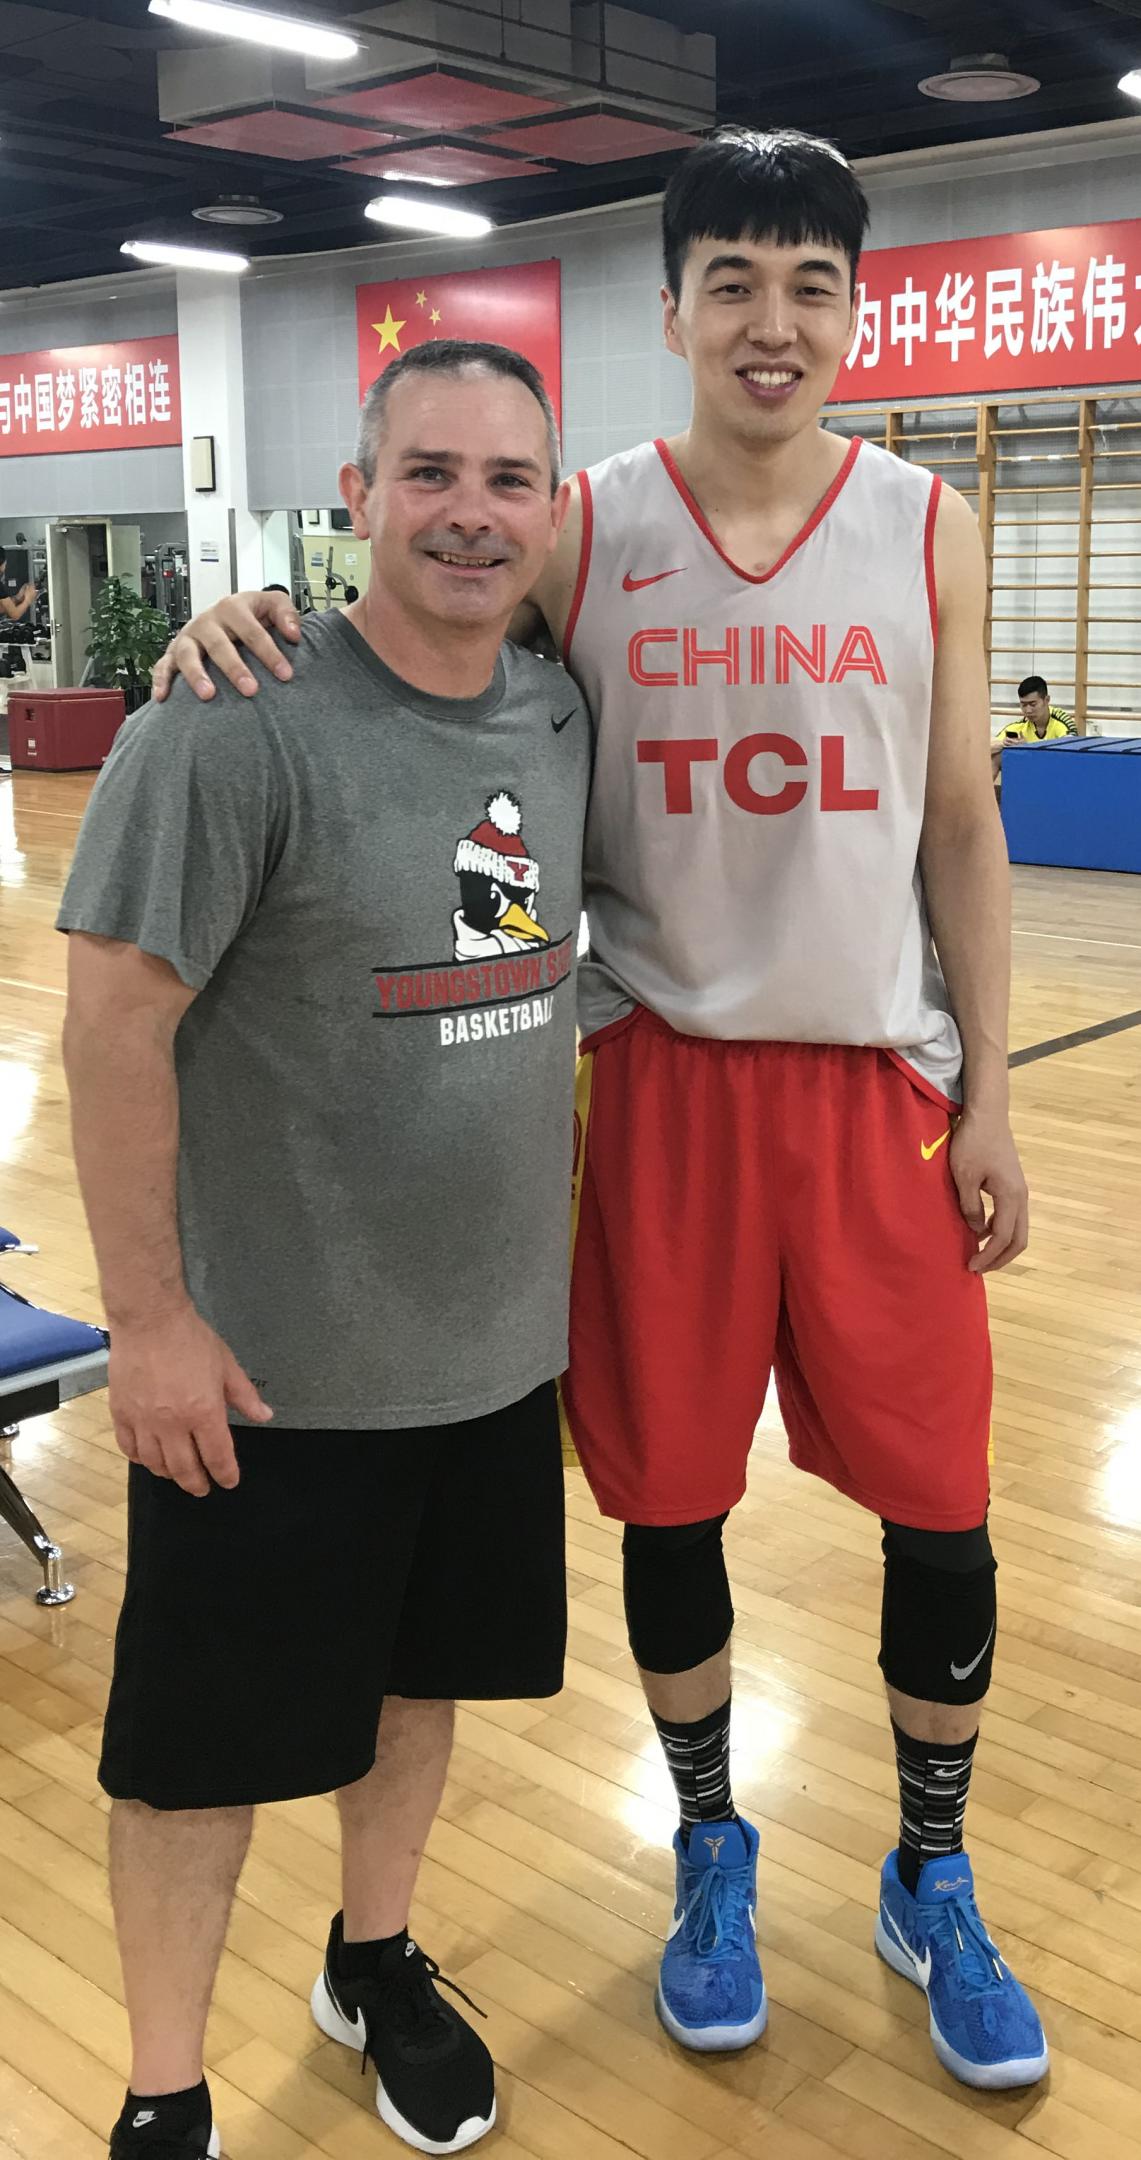 Todd Burkey with Zeng Lingxu of the Chinese national basketball team at the Chinese Olympic Training Center in Beijing.